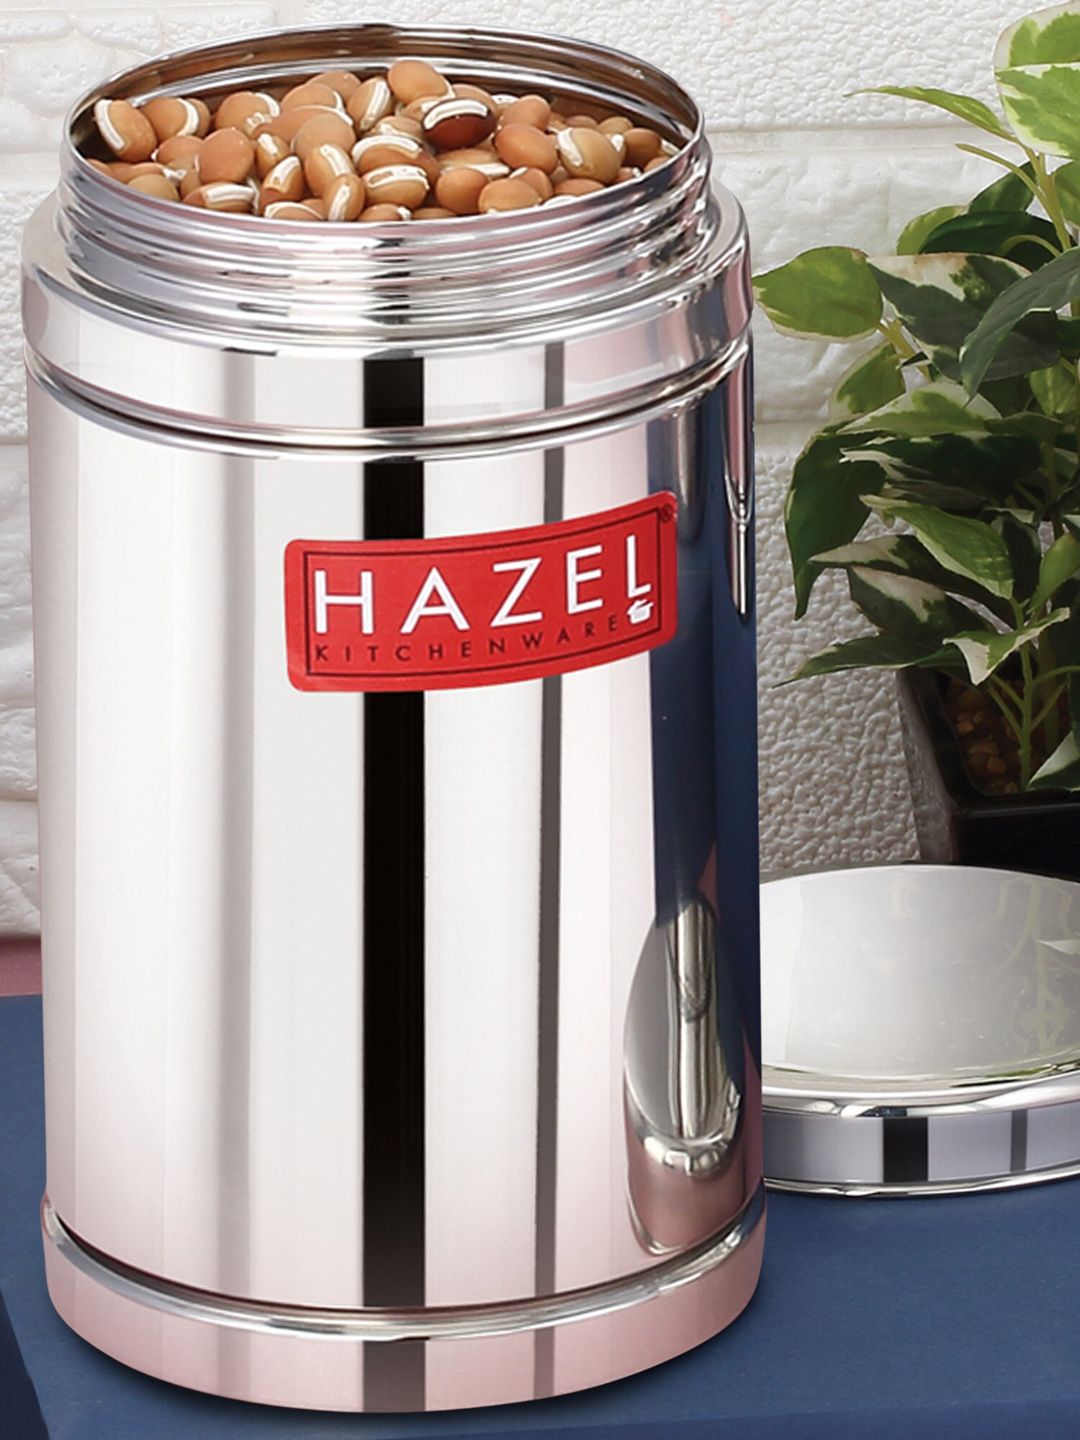 HAZEL Silver-Toned Stainless Steel Container Price in India